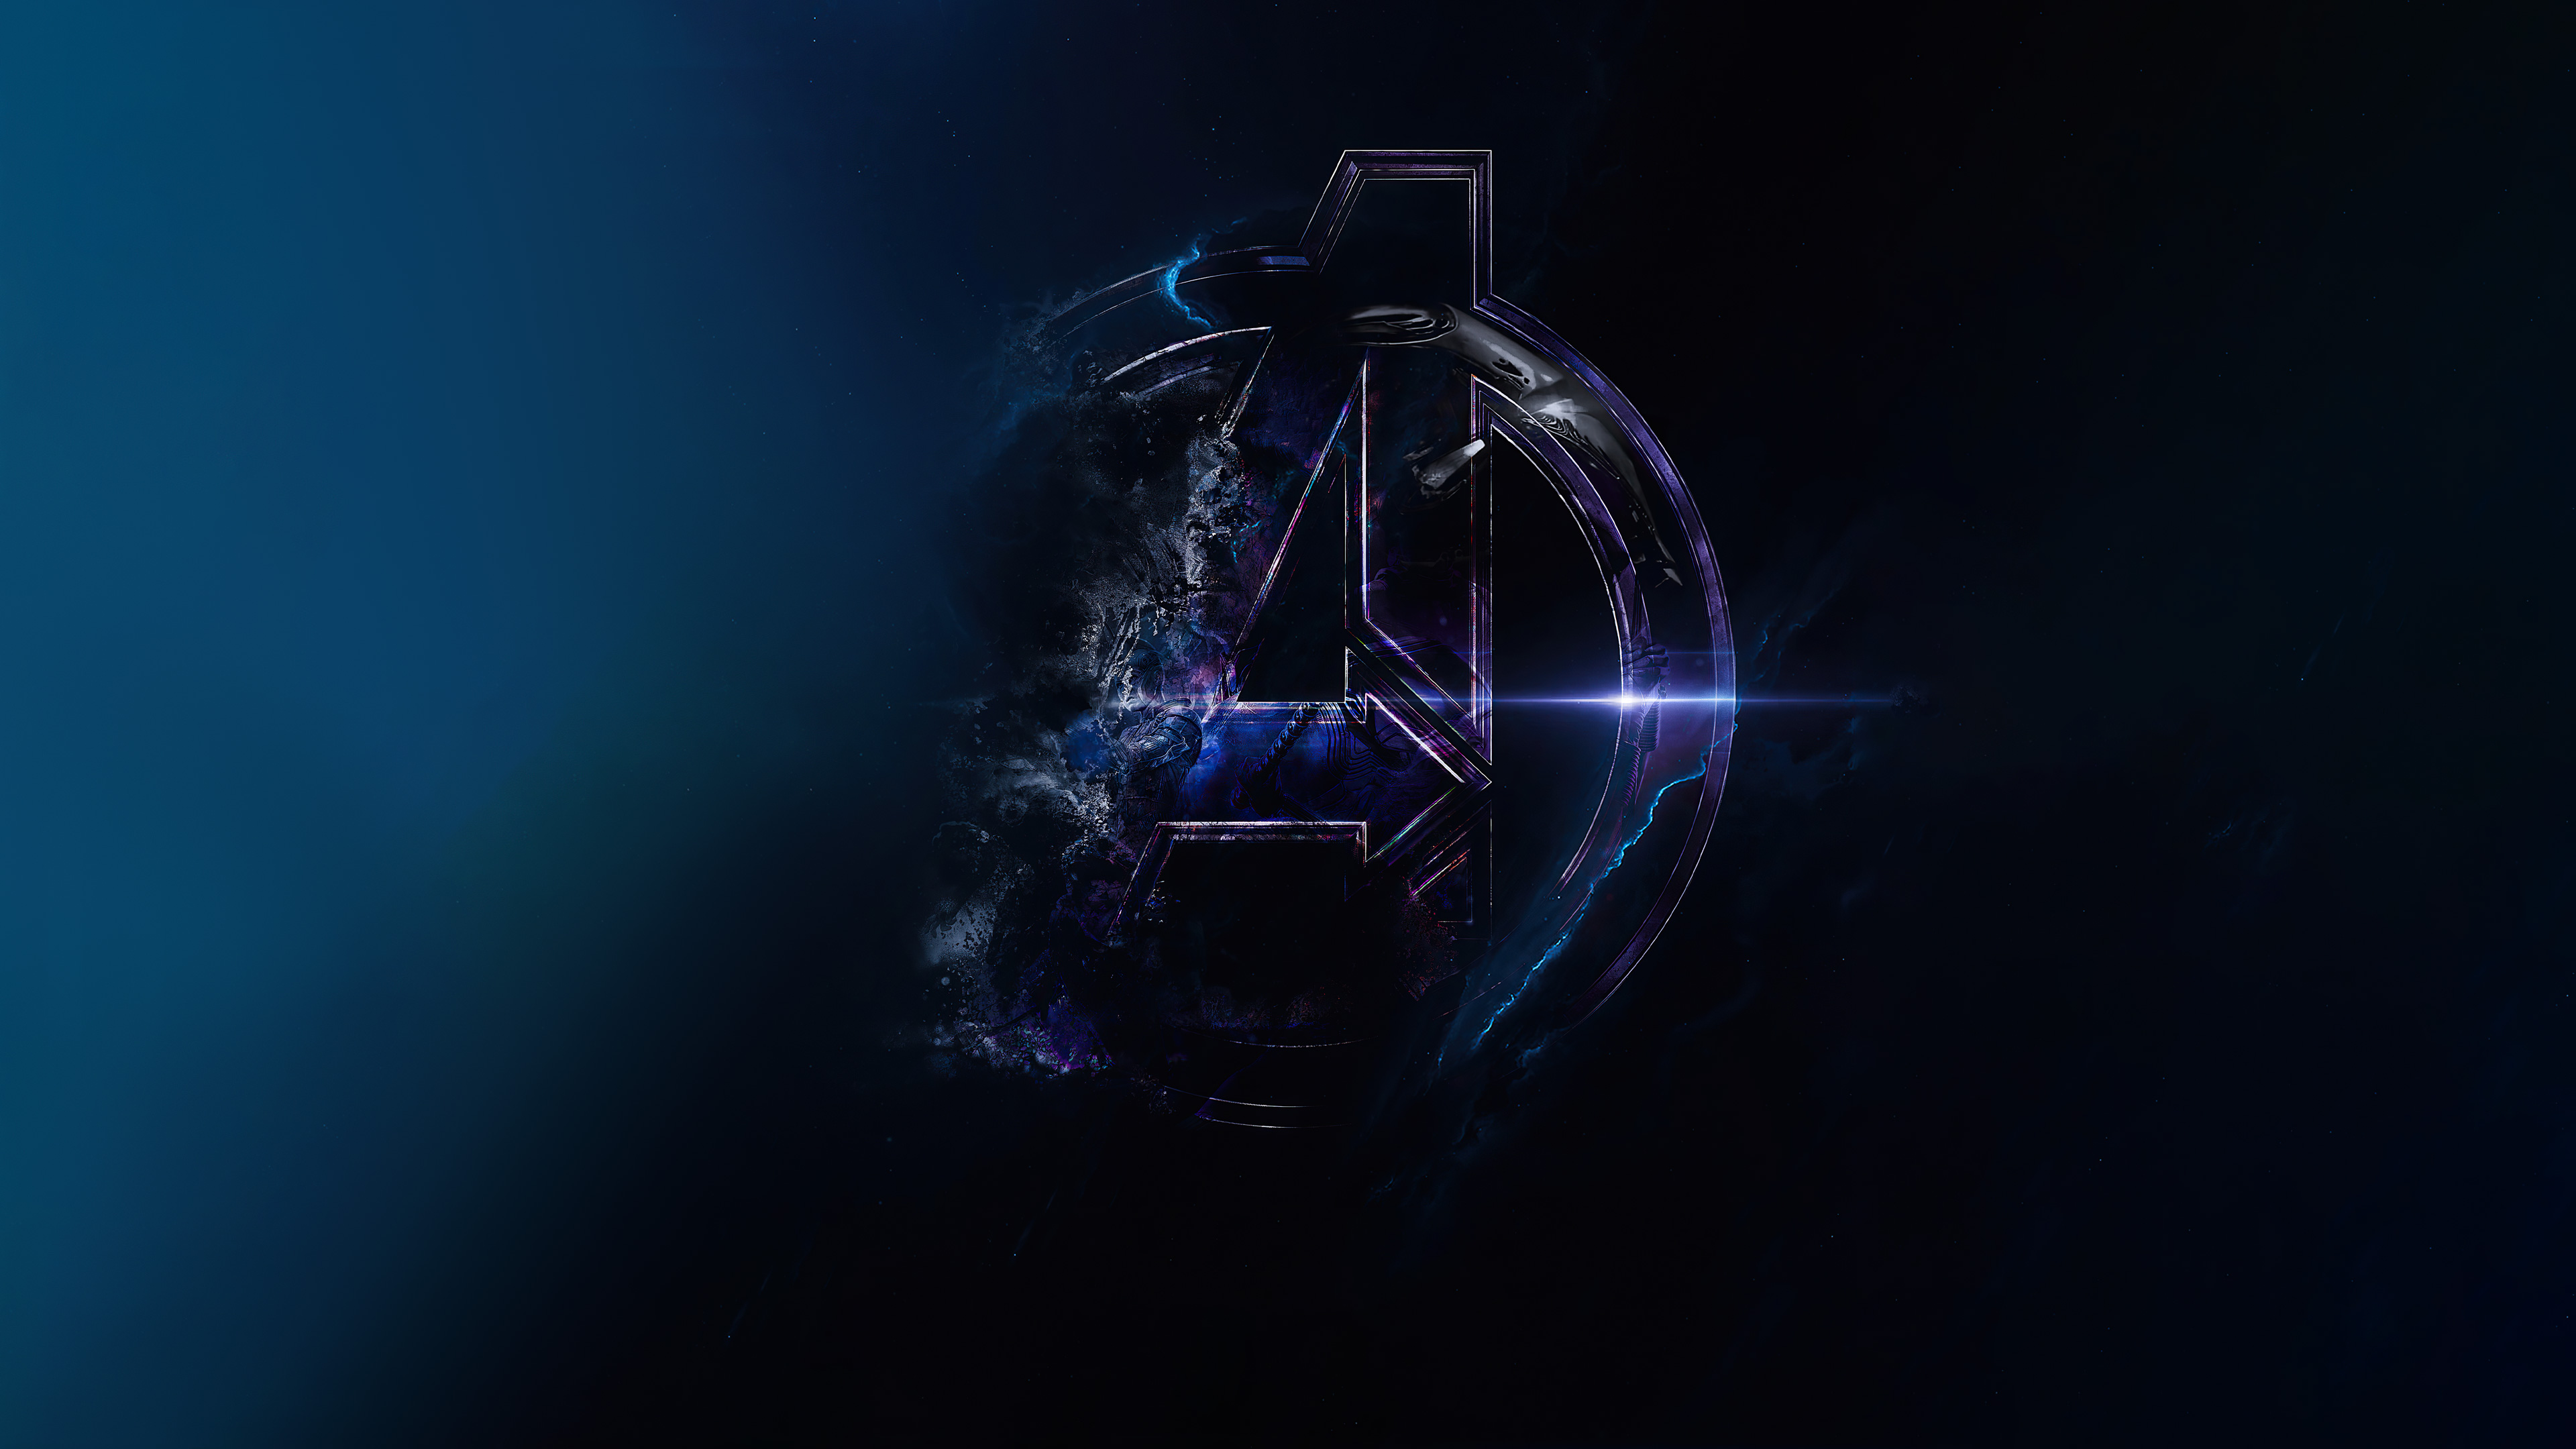 Wallpapers avengers infinity war films movies and tv series on the desktop